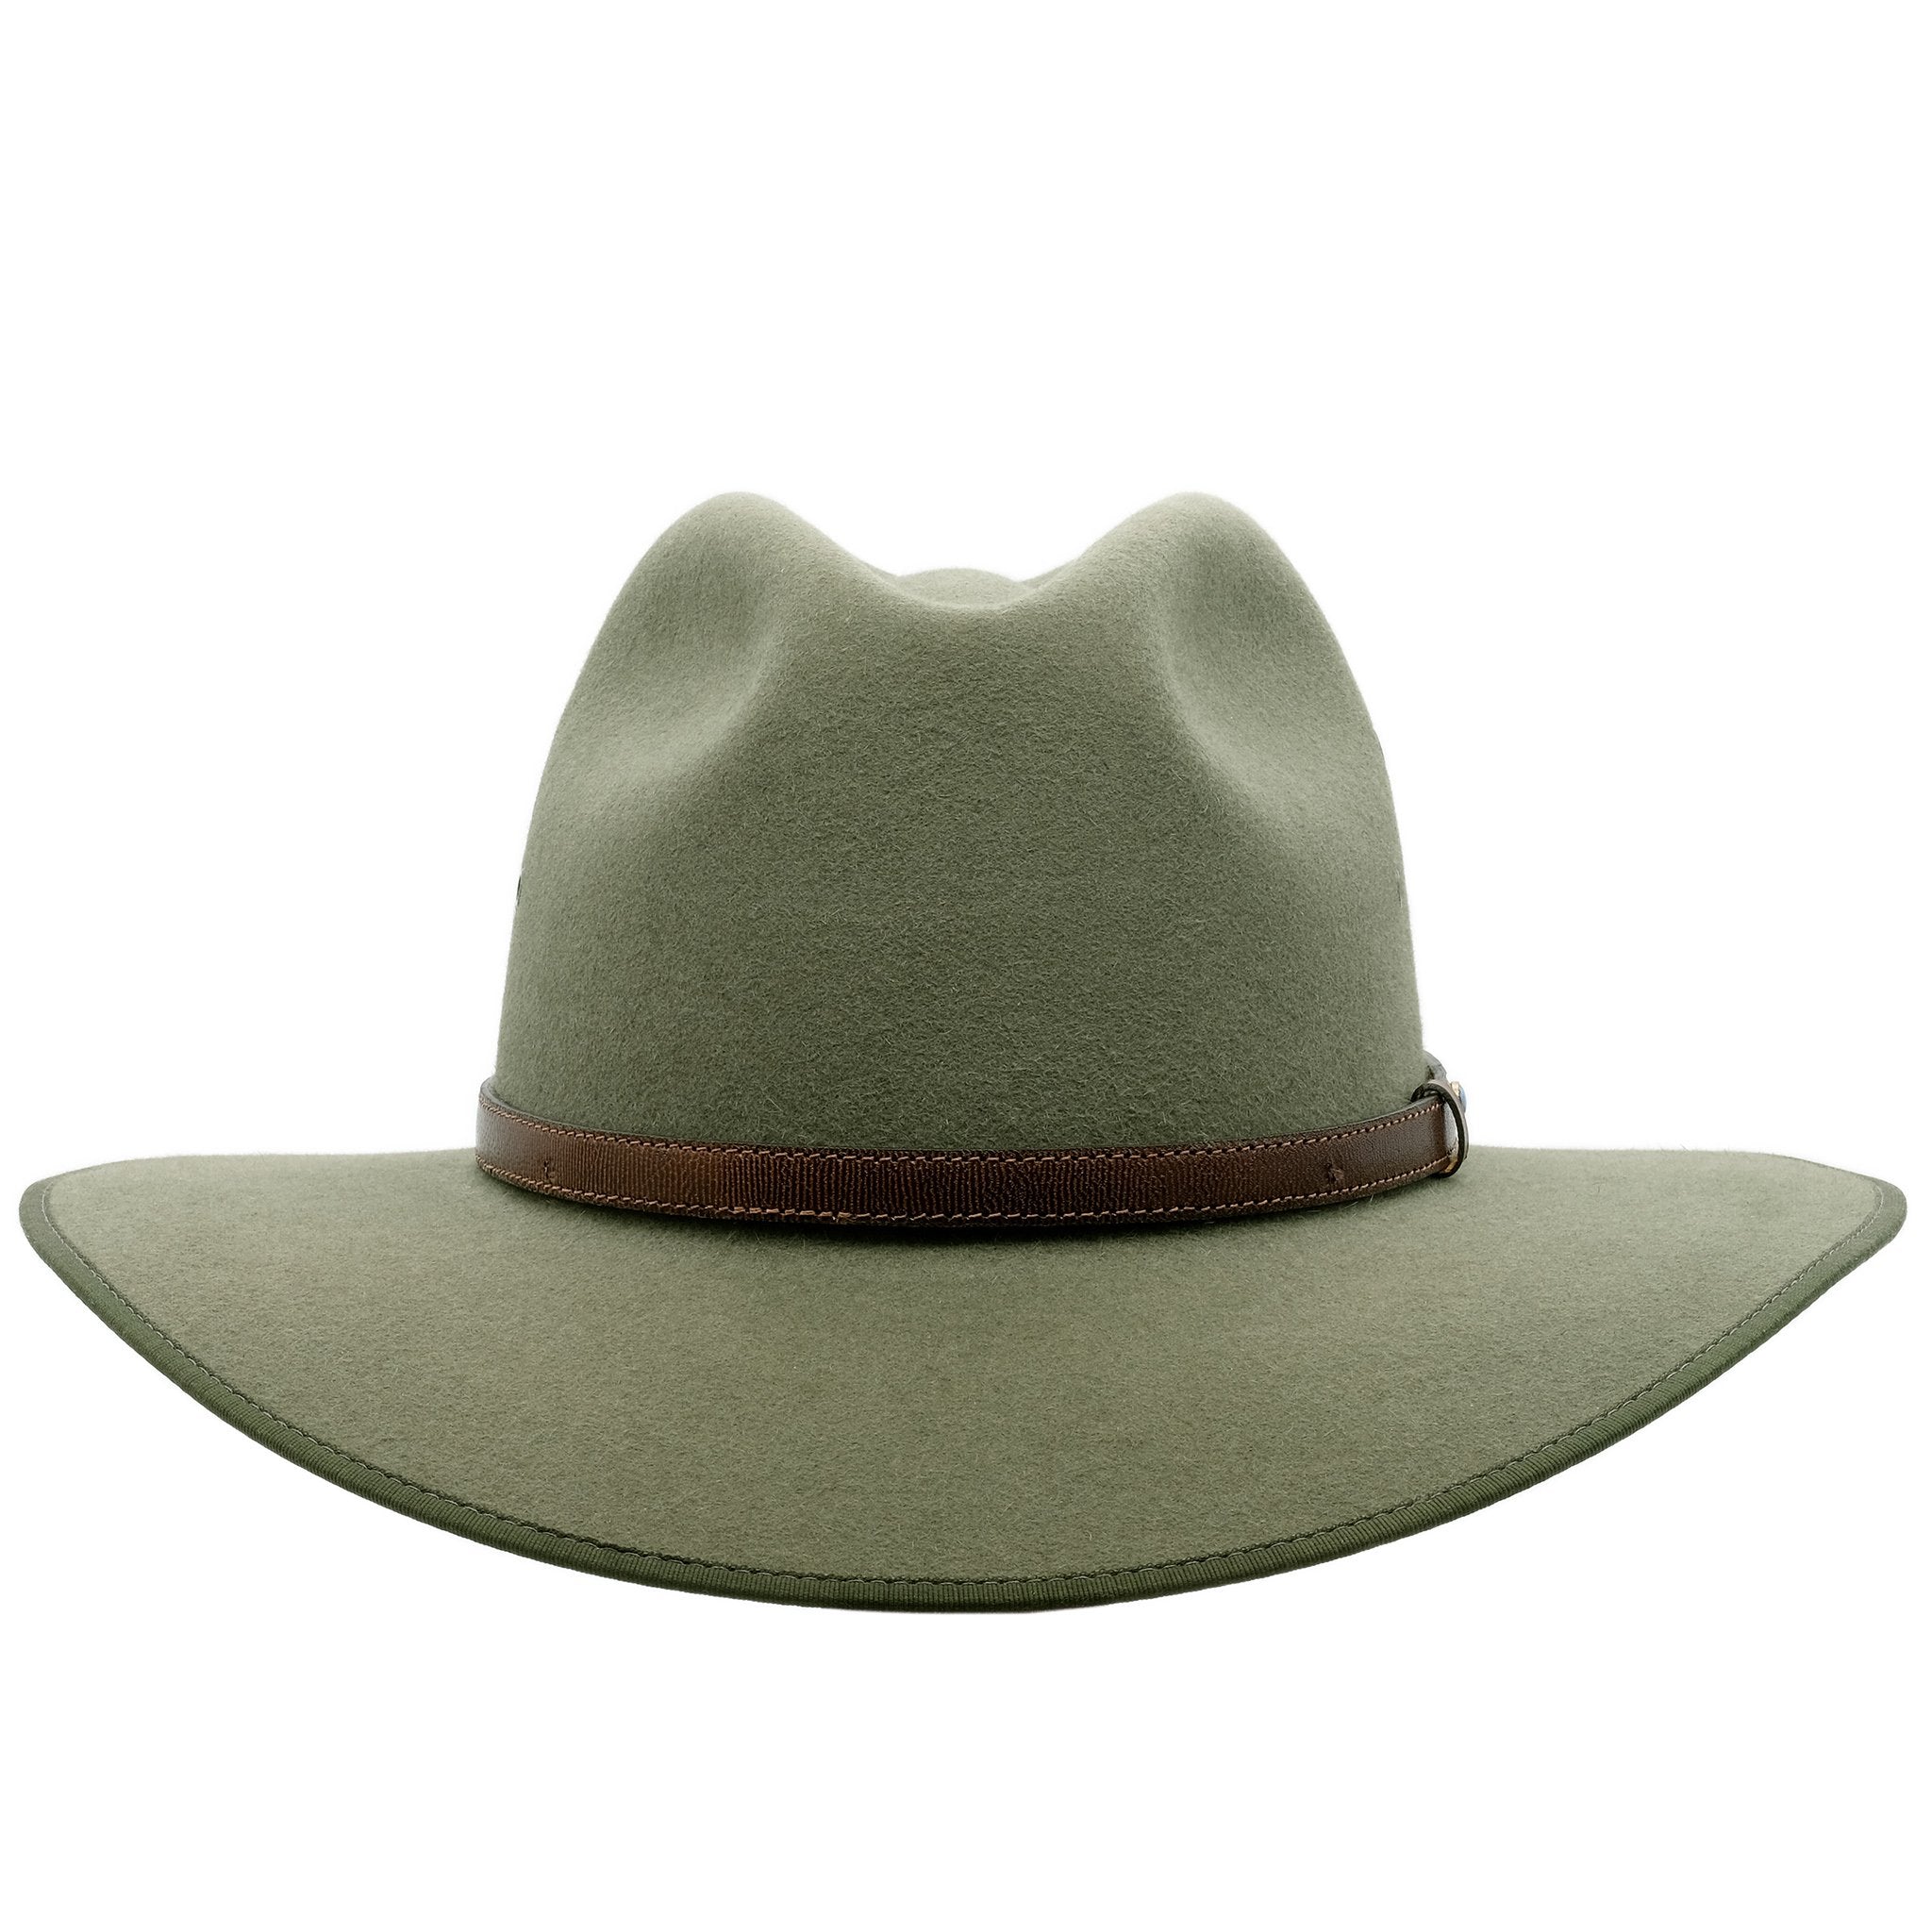 Front view of Akubra Coober Pedy hat in Bluegrass green colour